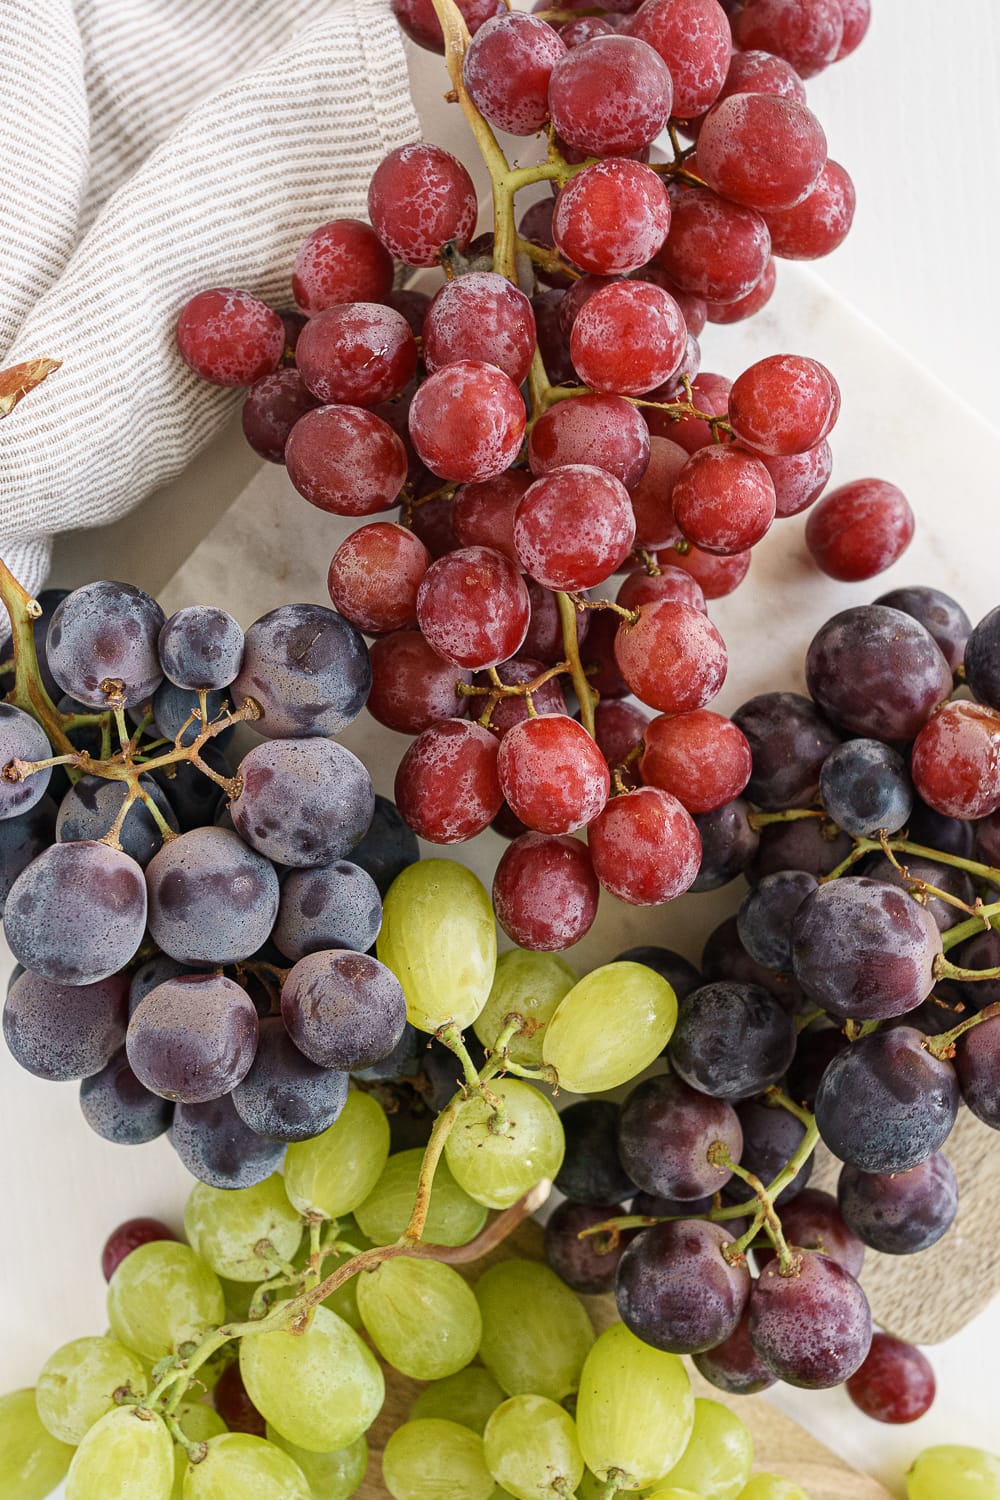 Frozen Grapes: The Best Summer Snack